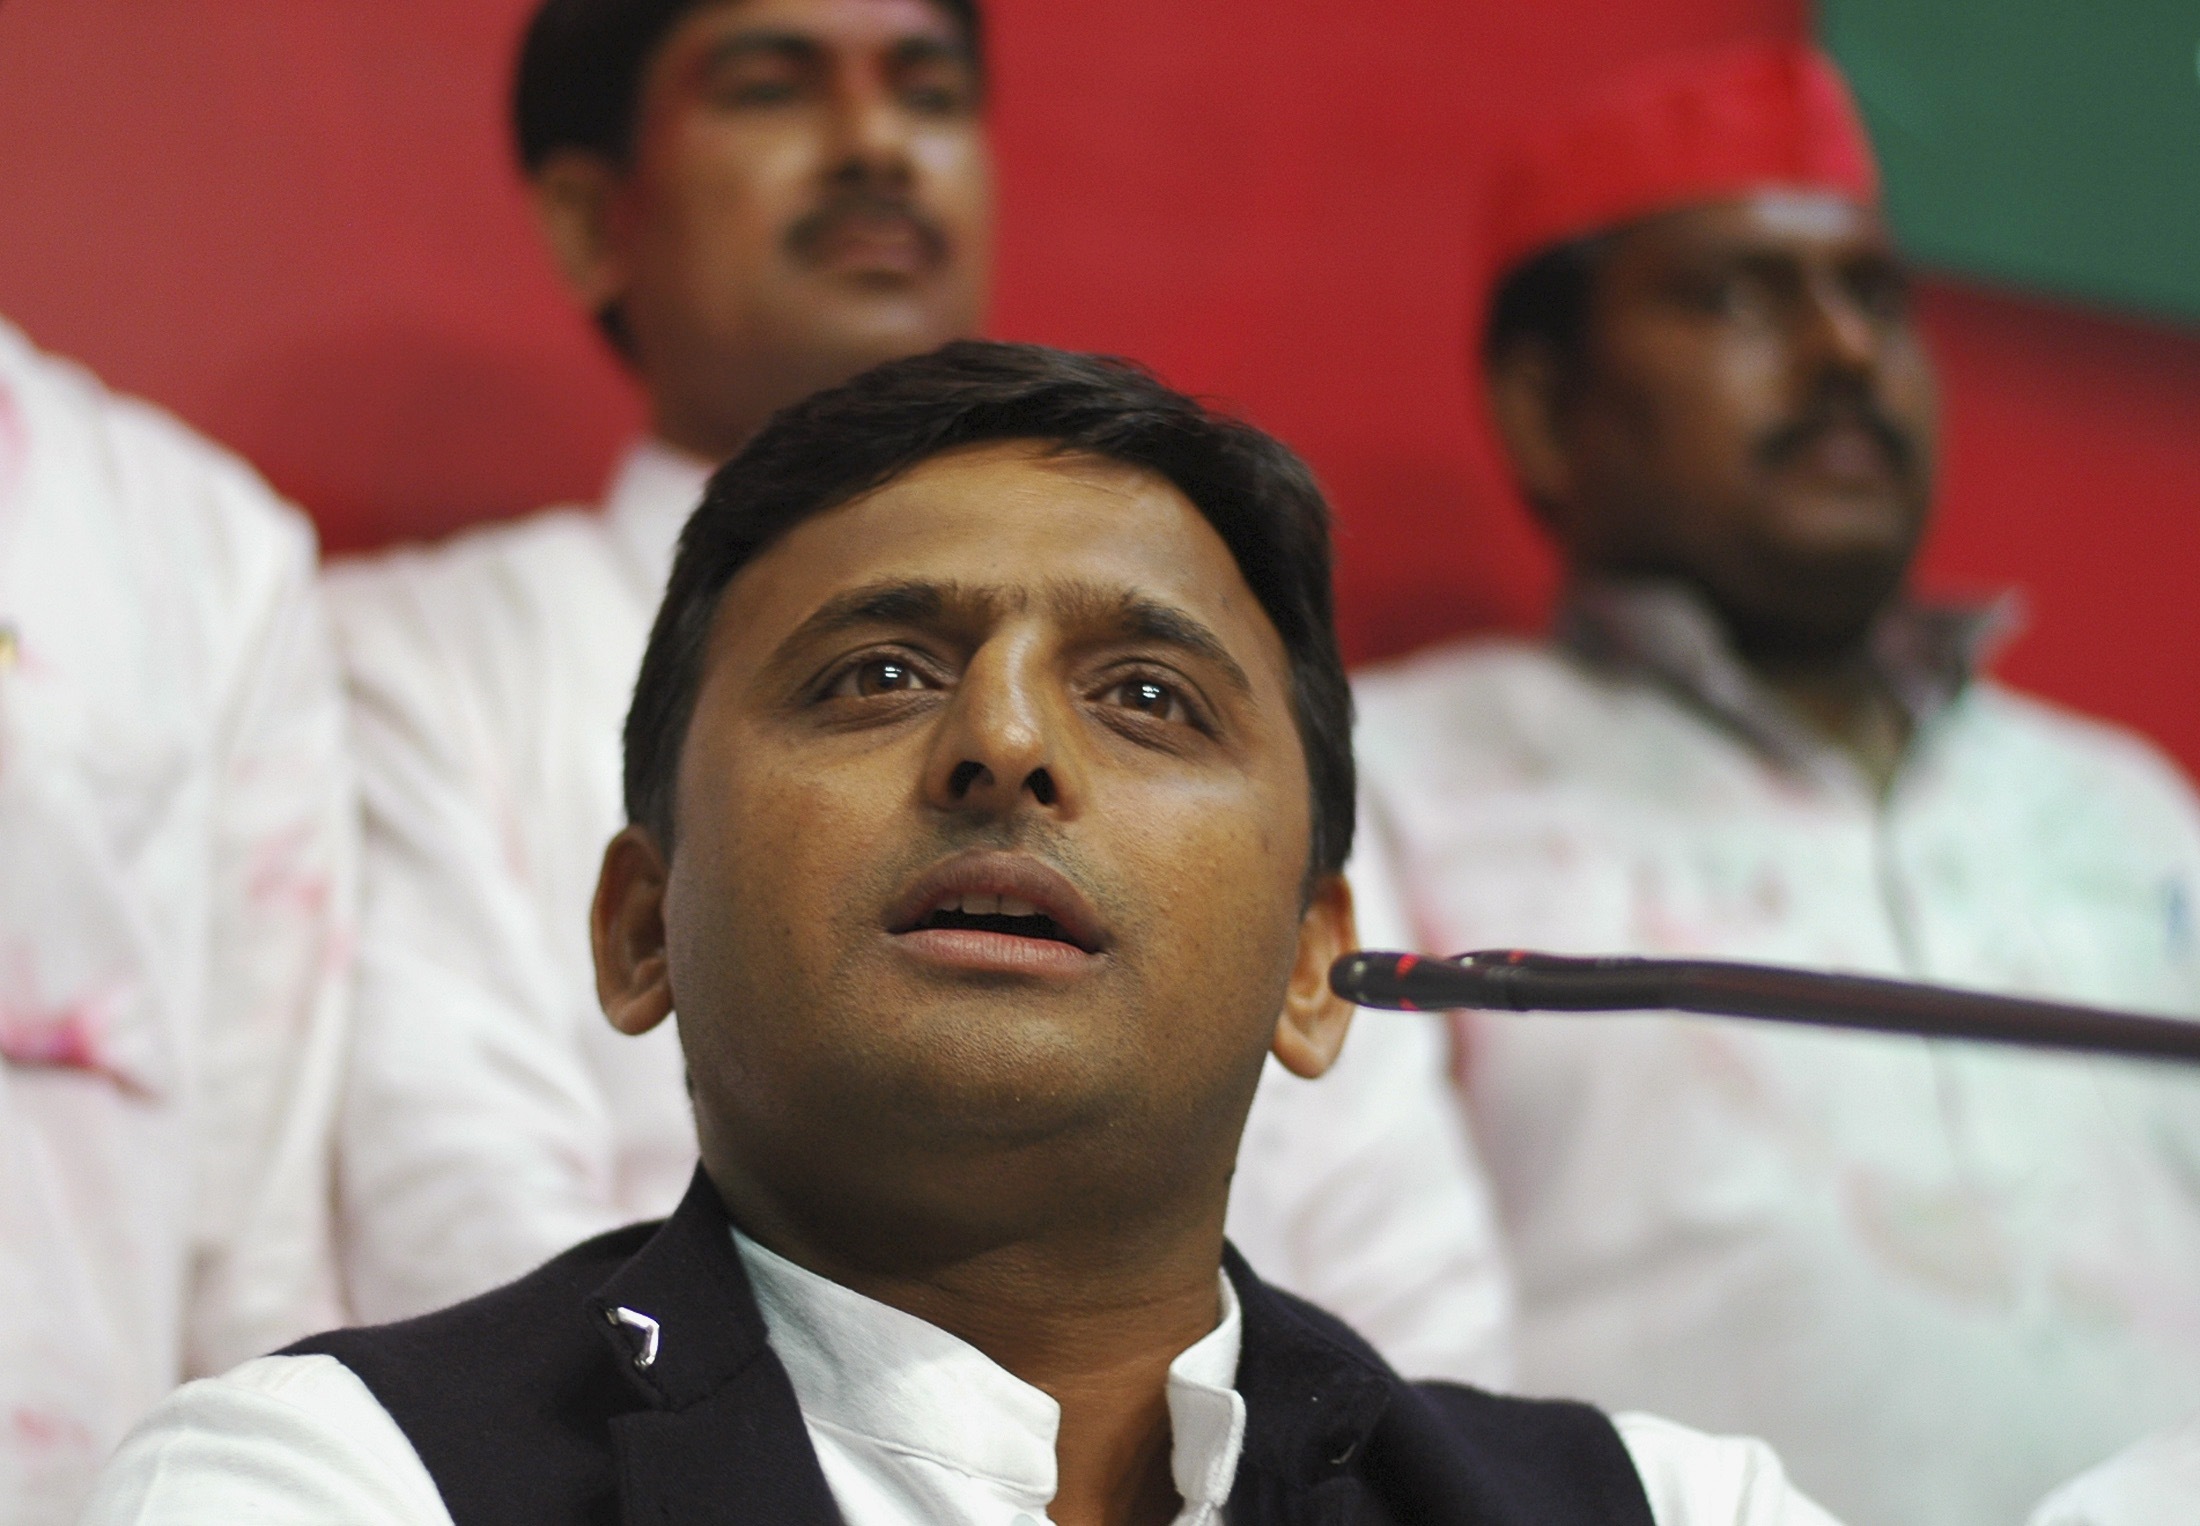 Akhilesh Yadav speaks during a news conference in the northern Indian city of Lucknow on March 6, 2012 (Reuters)